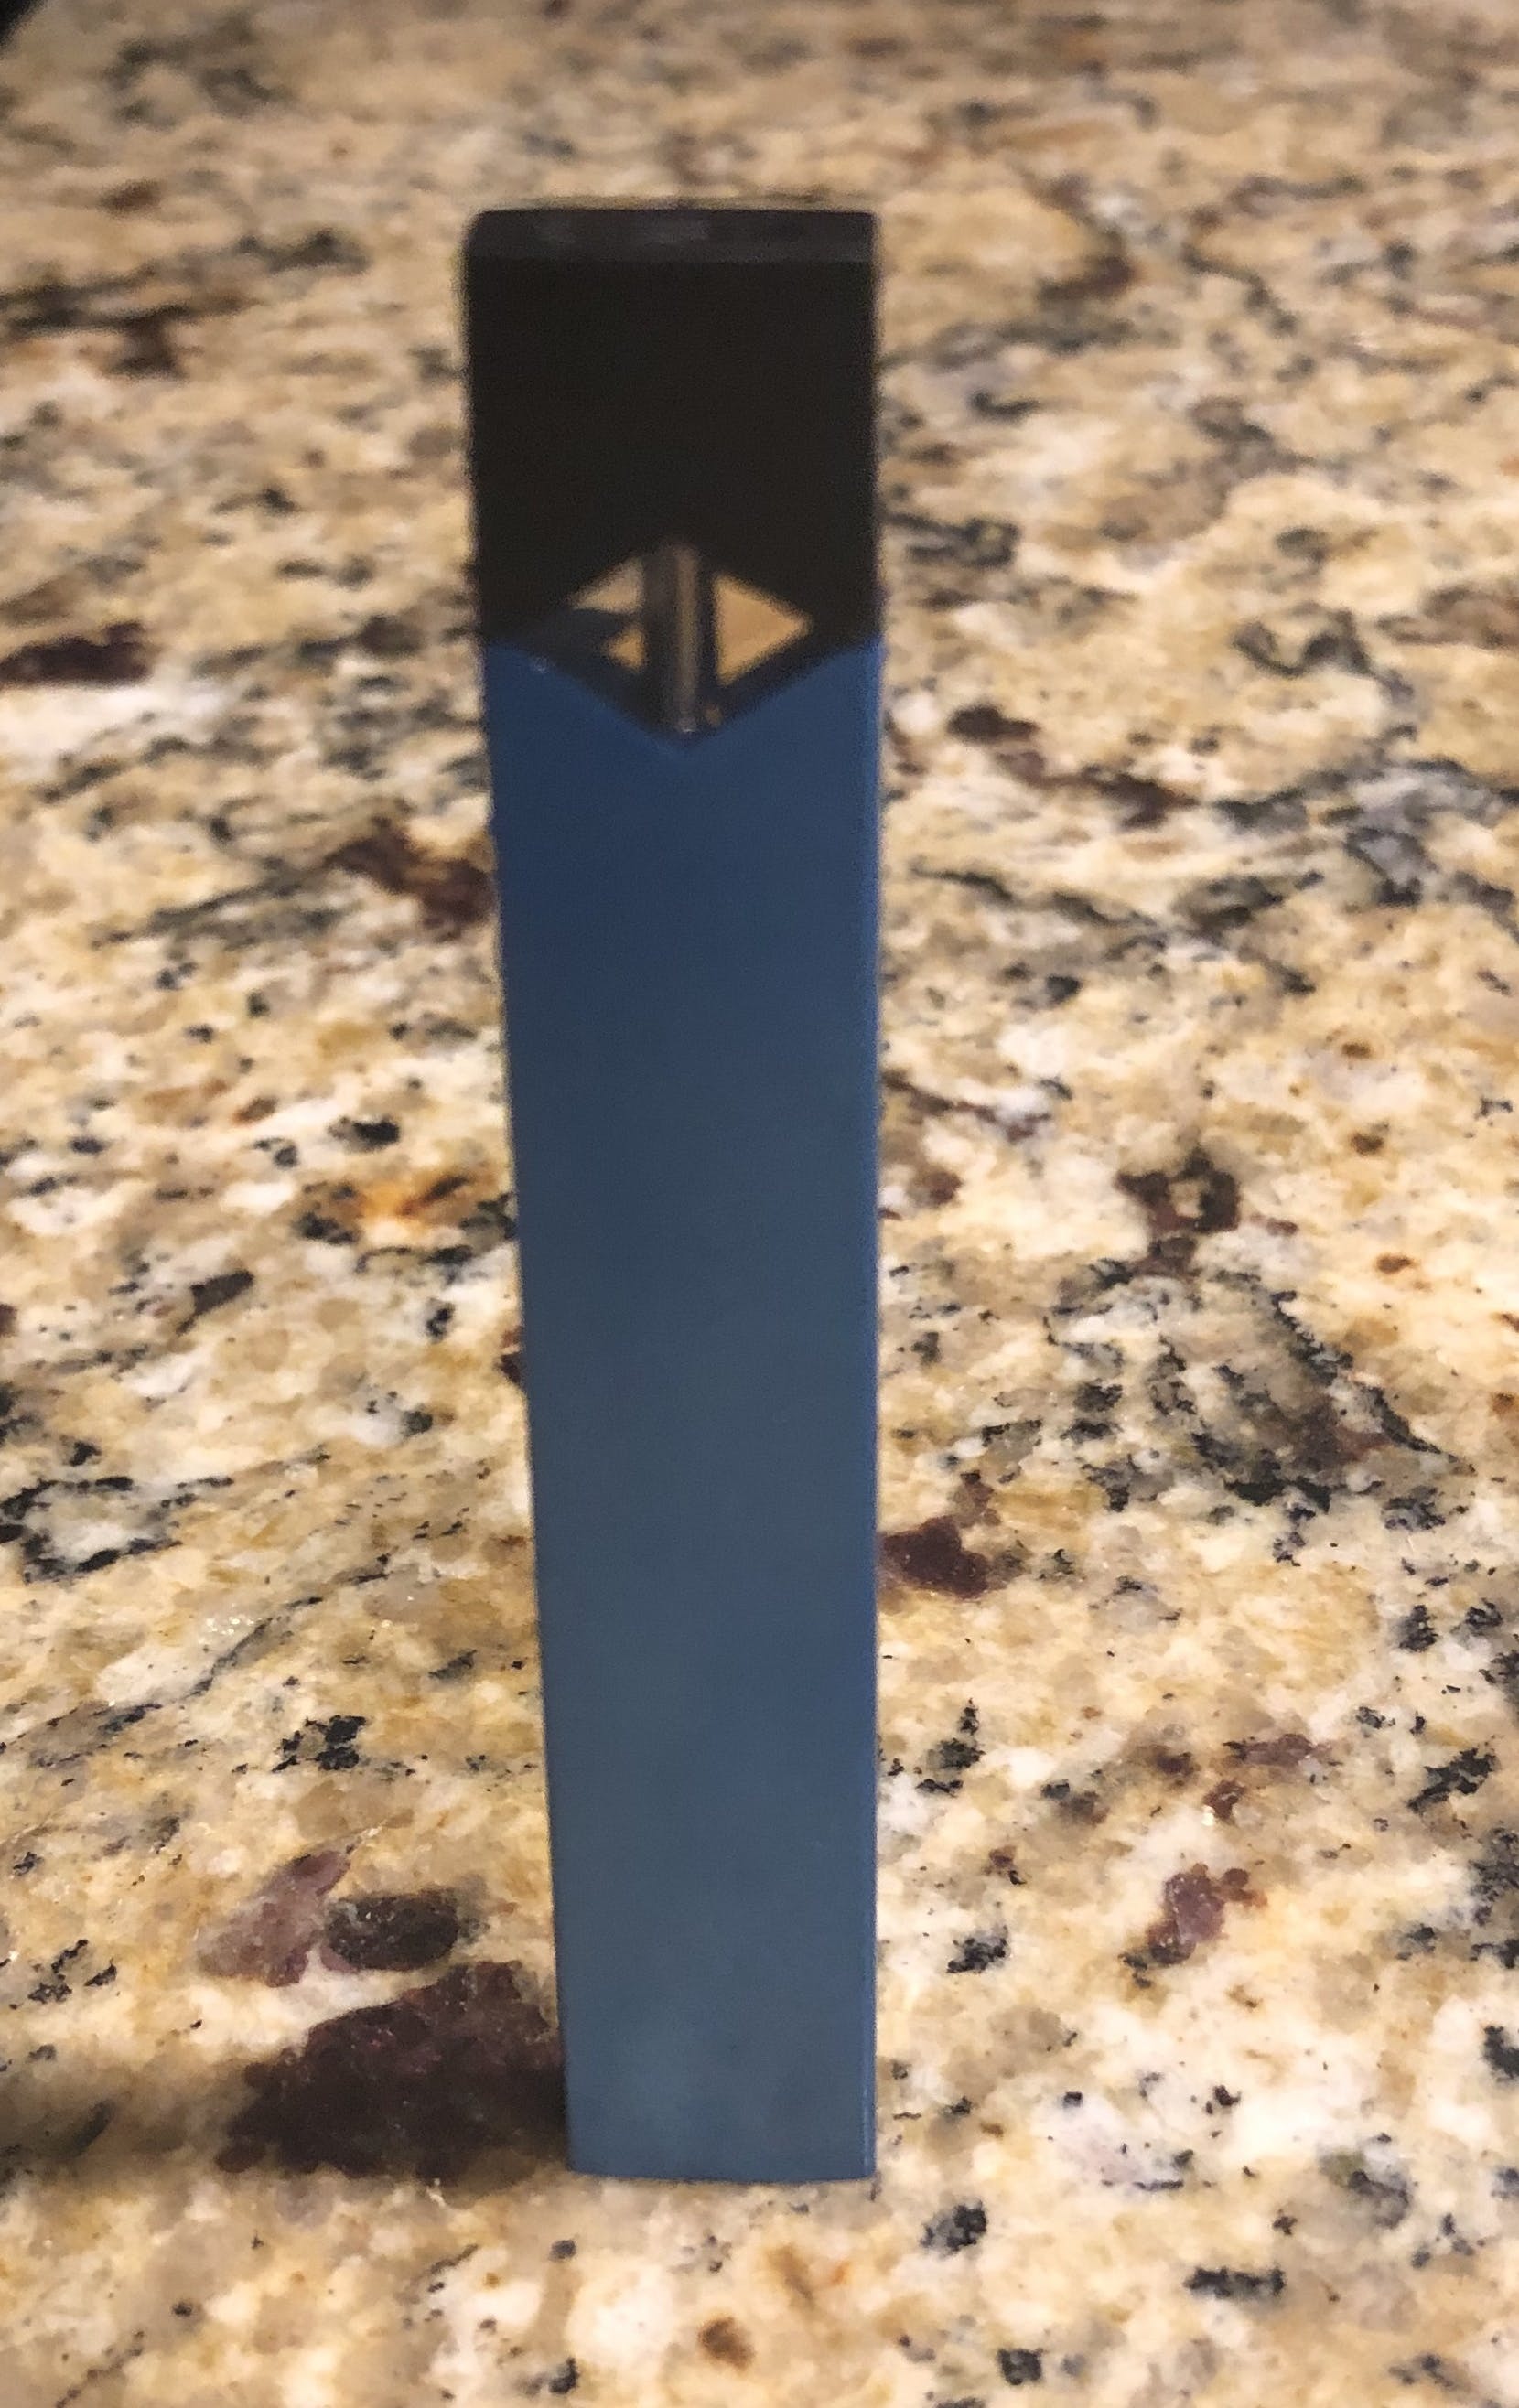 gear-juul-compatible-vape-pen-with-refillable-pods